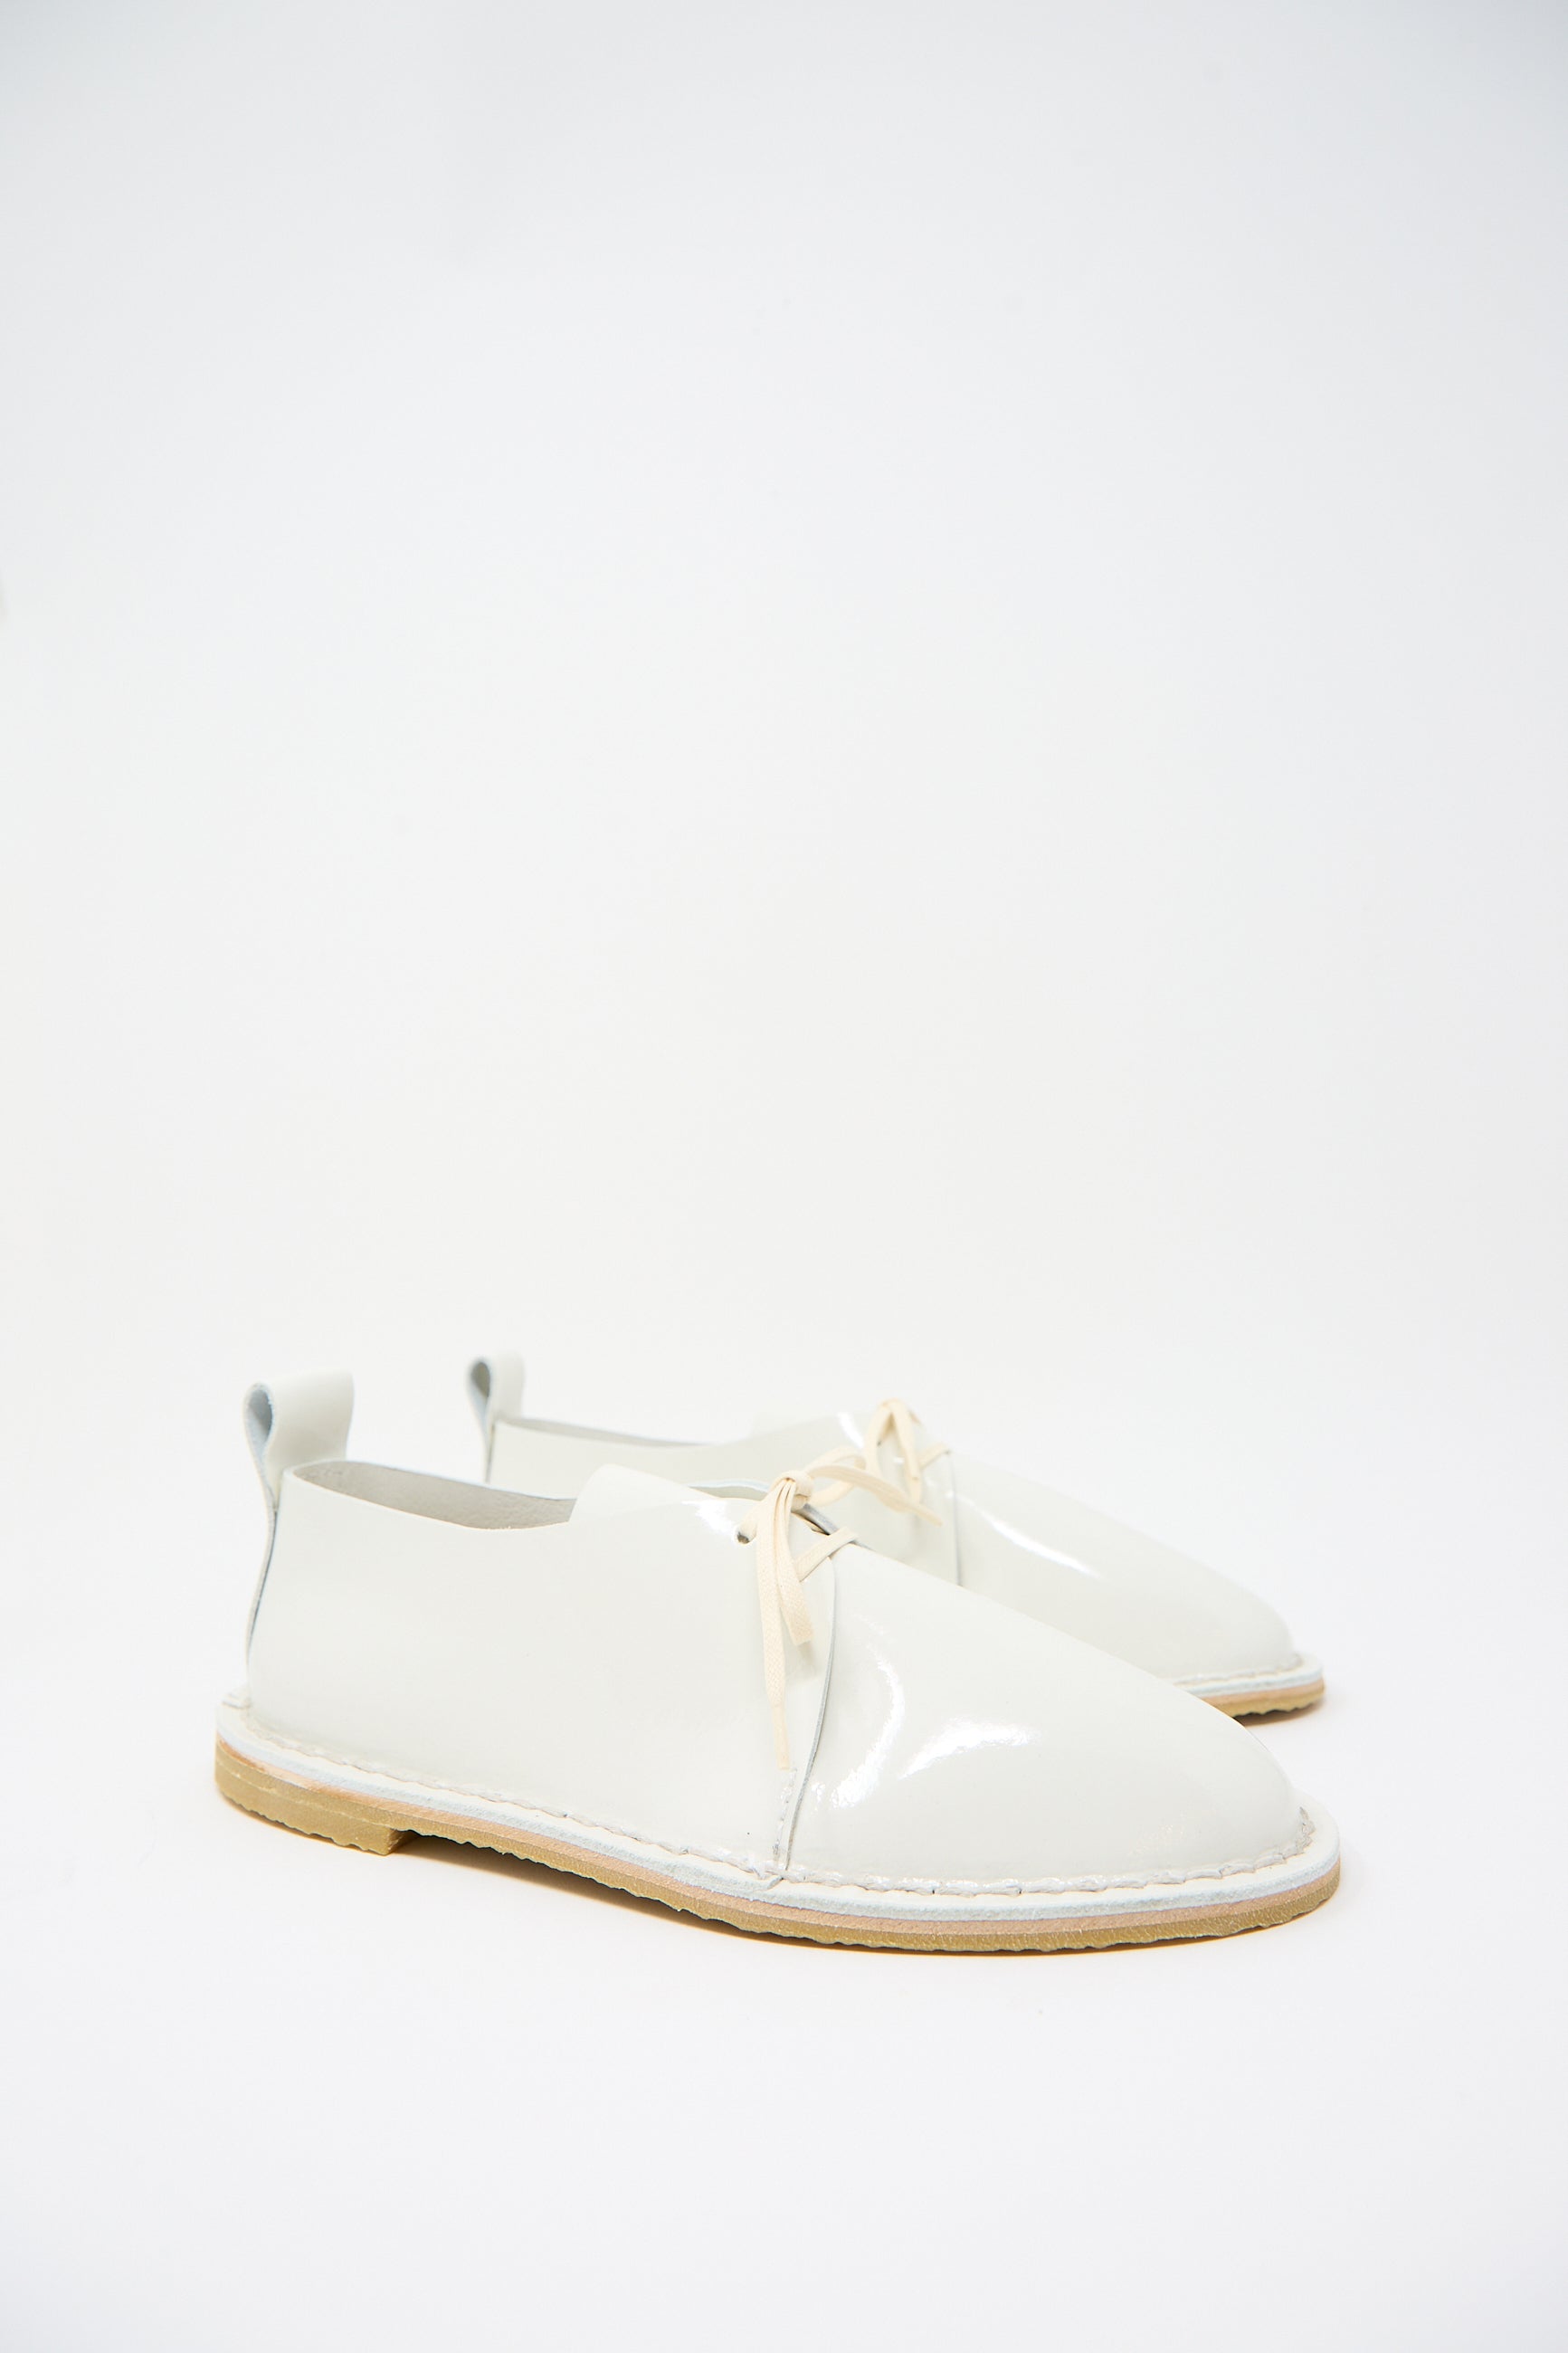 A pair of sustainably made white patent leather shoes with beige soles and laces are displayed on a plain white background. The Patent Leather Derbie in White by Steve Mono features a casual design with a pull tab at the back.